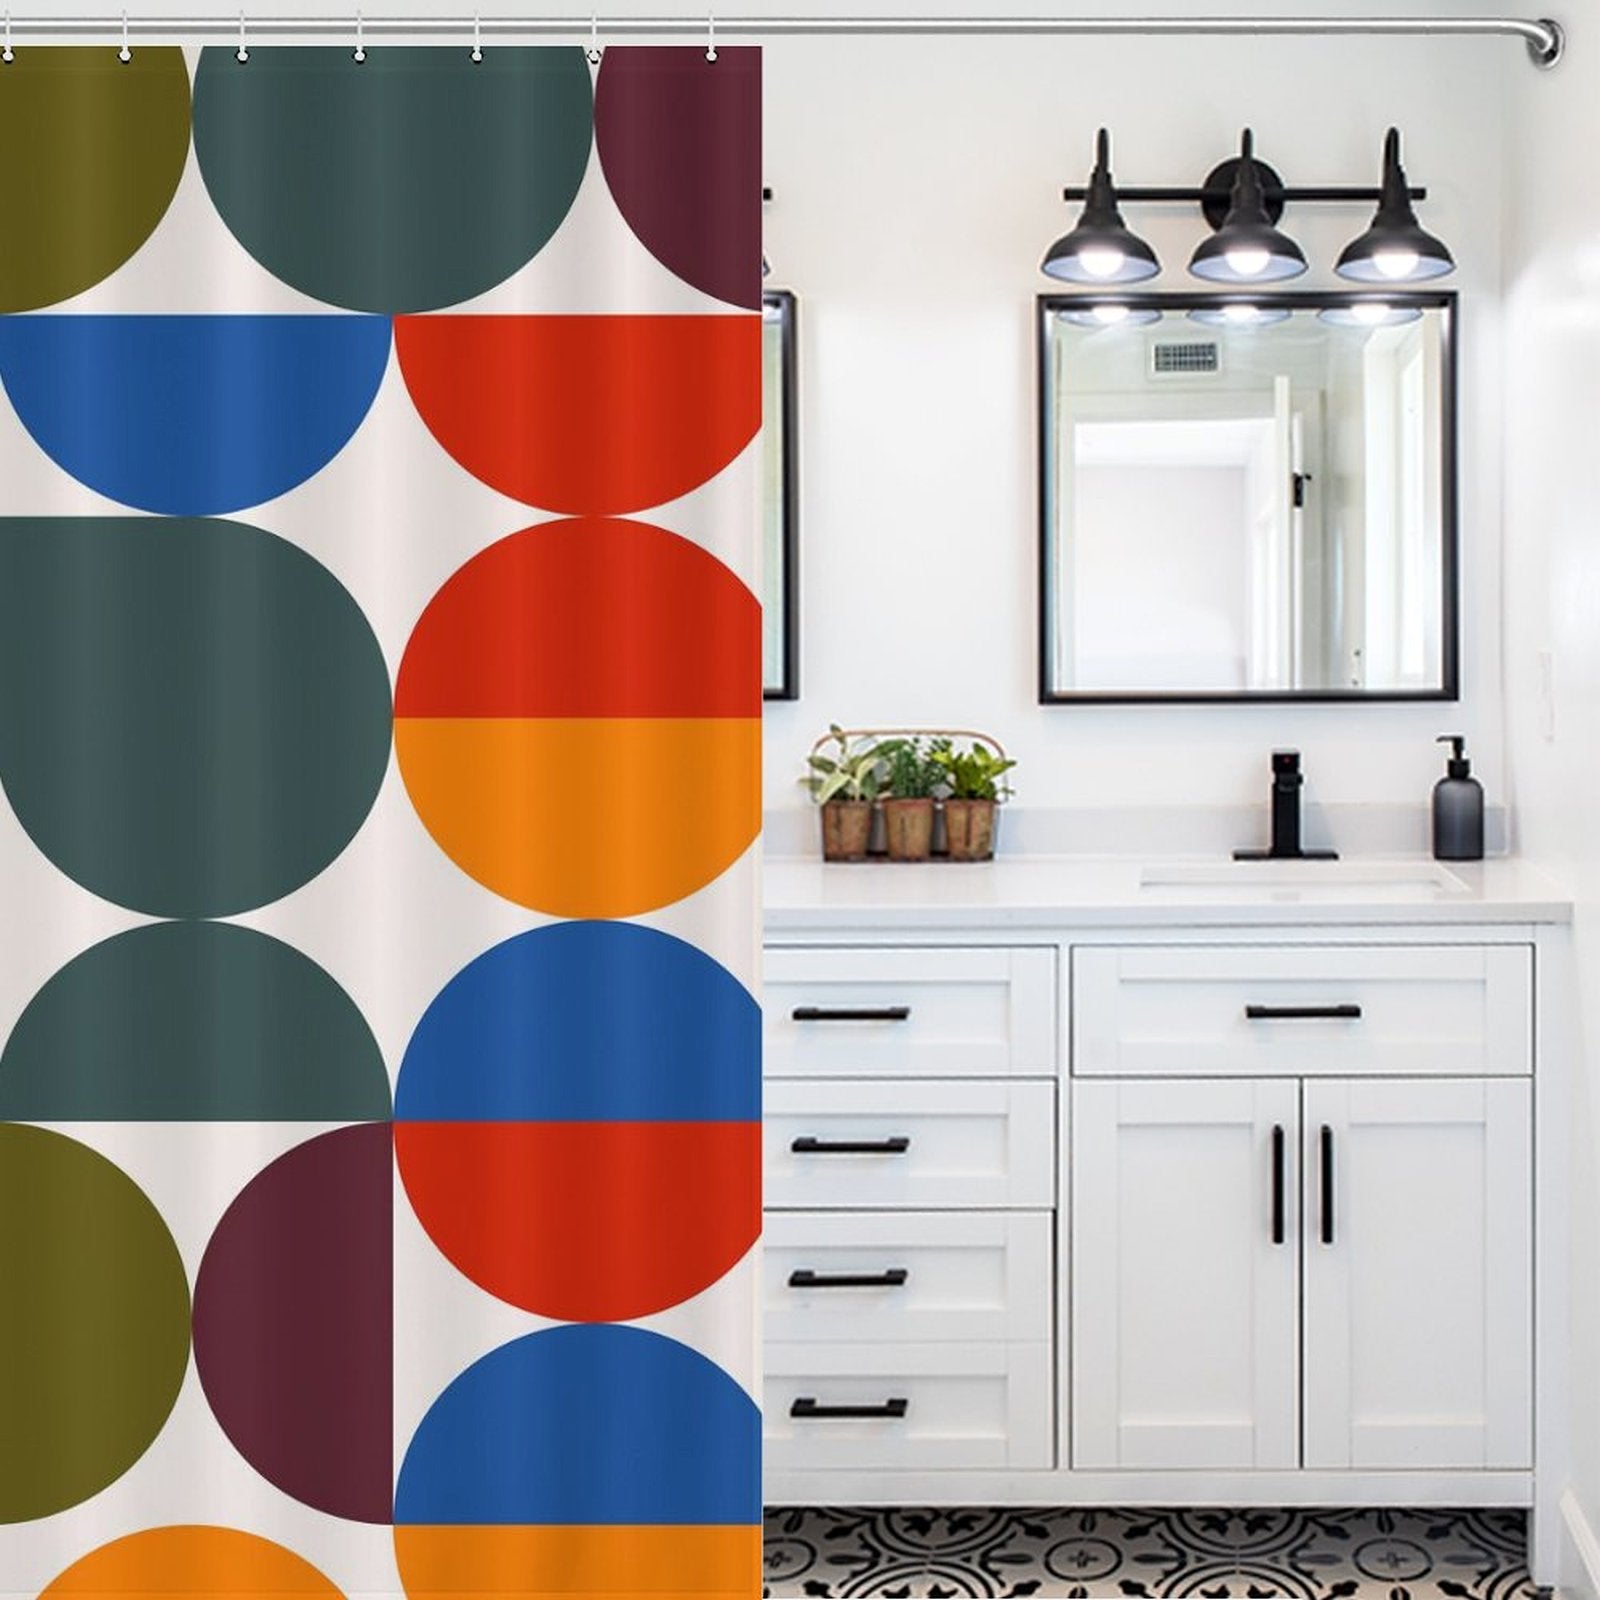 A bathroom with a white vanity and black fixtures, featuring an Abstract Modern Art Rainbow Polka Dot Geometric Shower Curtain-Cottoncat adorned with half-circle designs in vibrant green, red, blue, and yellow hues from Cotton Cat.